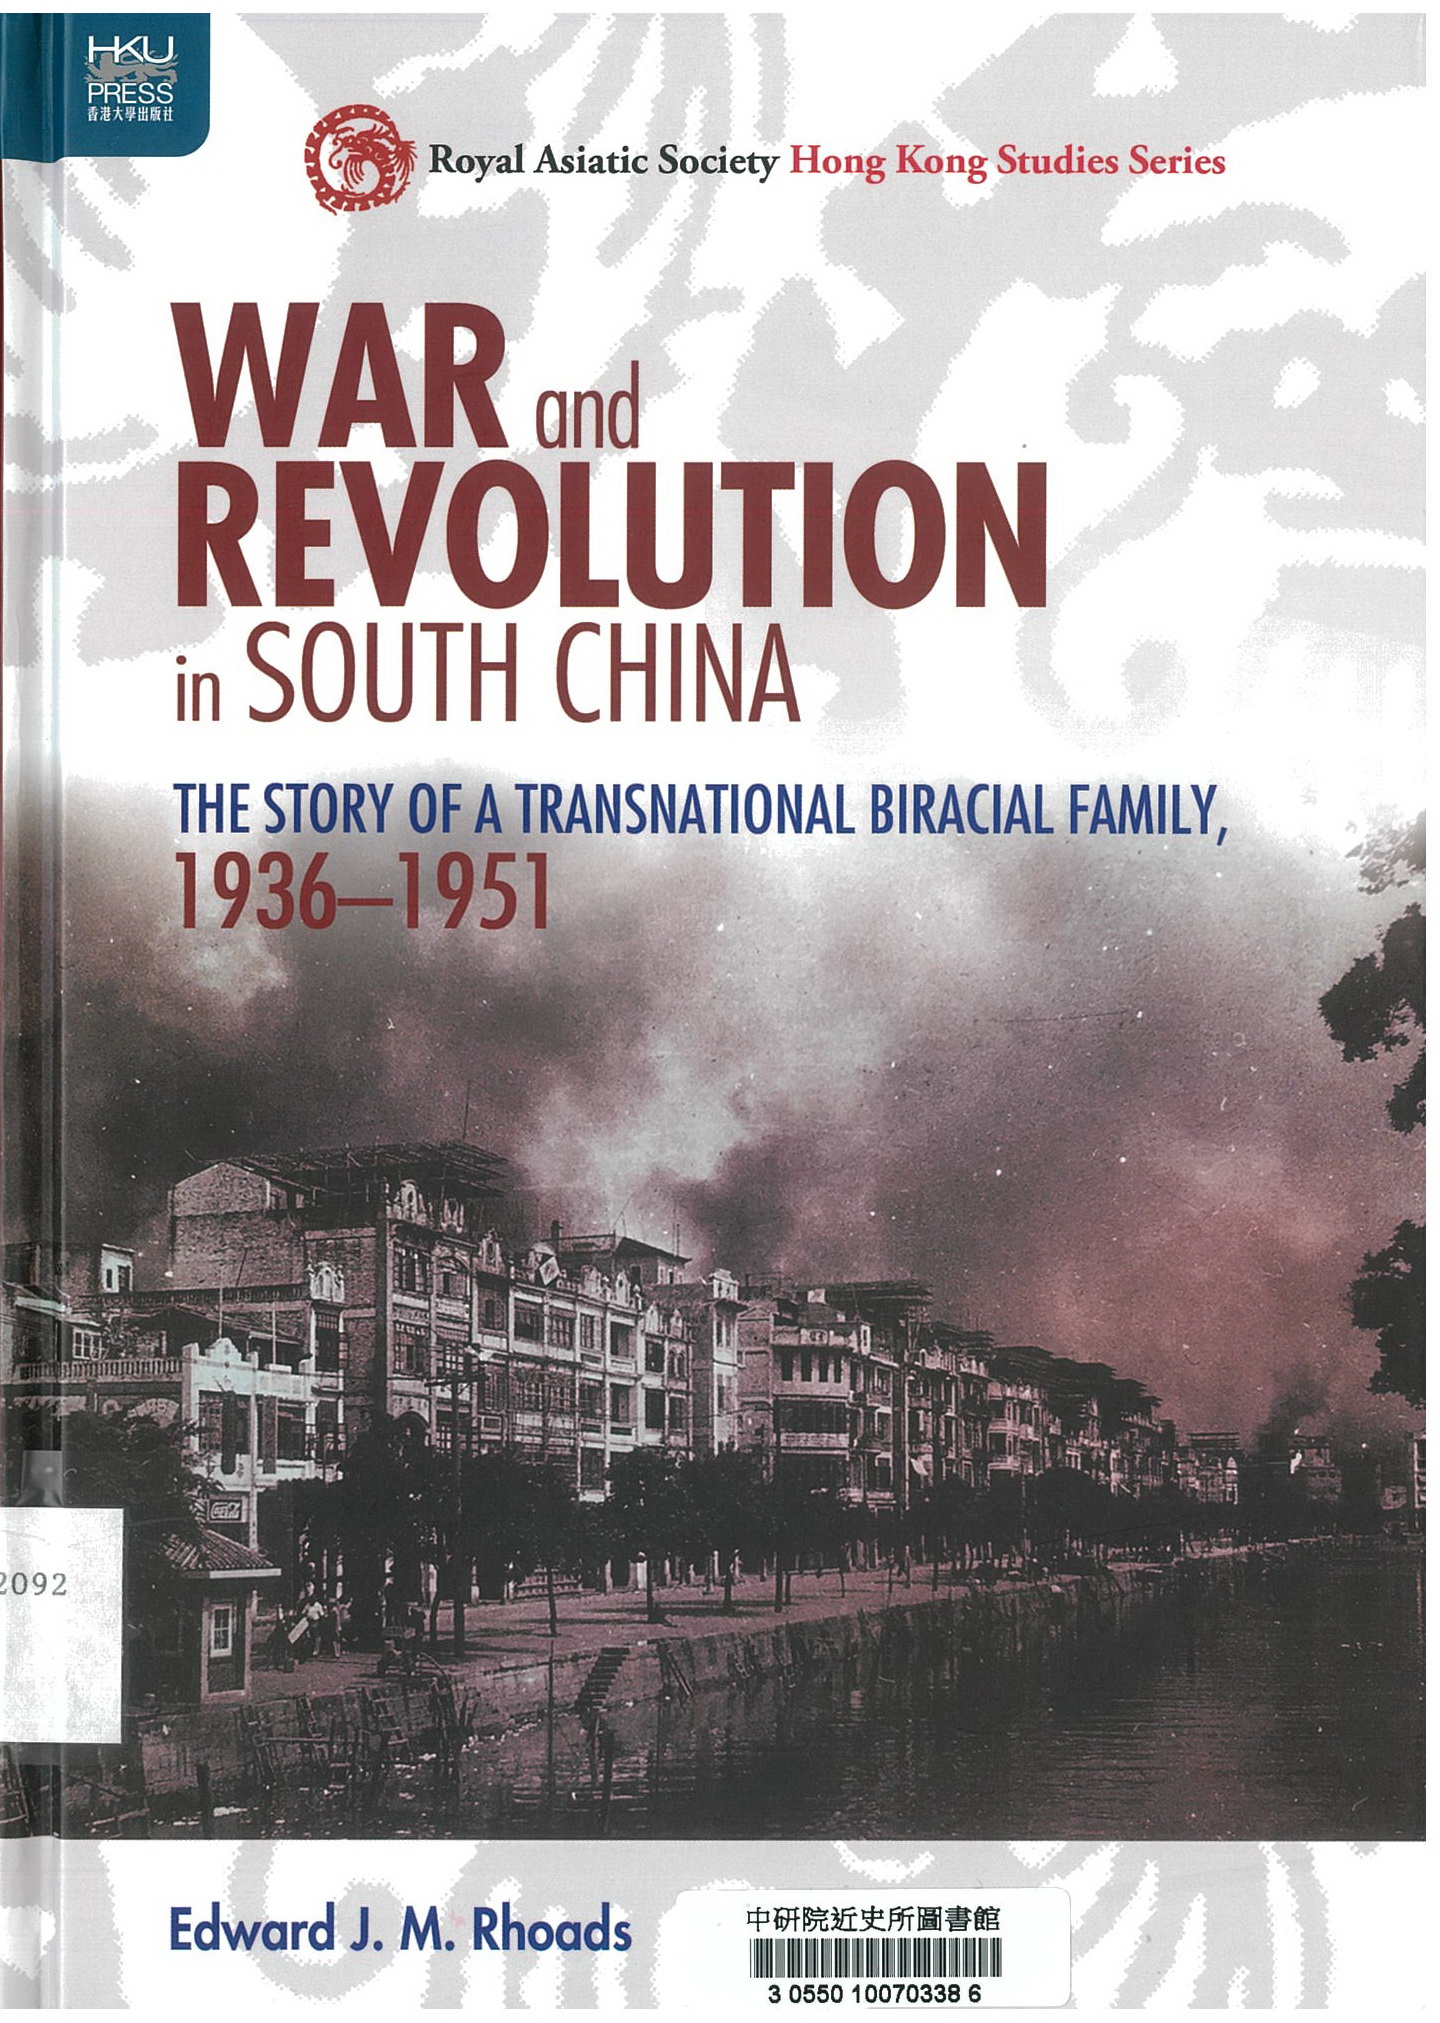 War and revolution in South China : the story of a transnational biracial family, 1936-1951